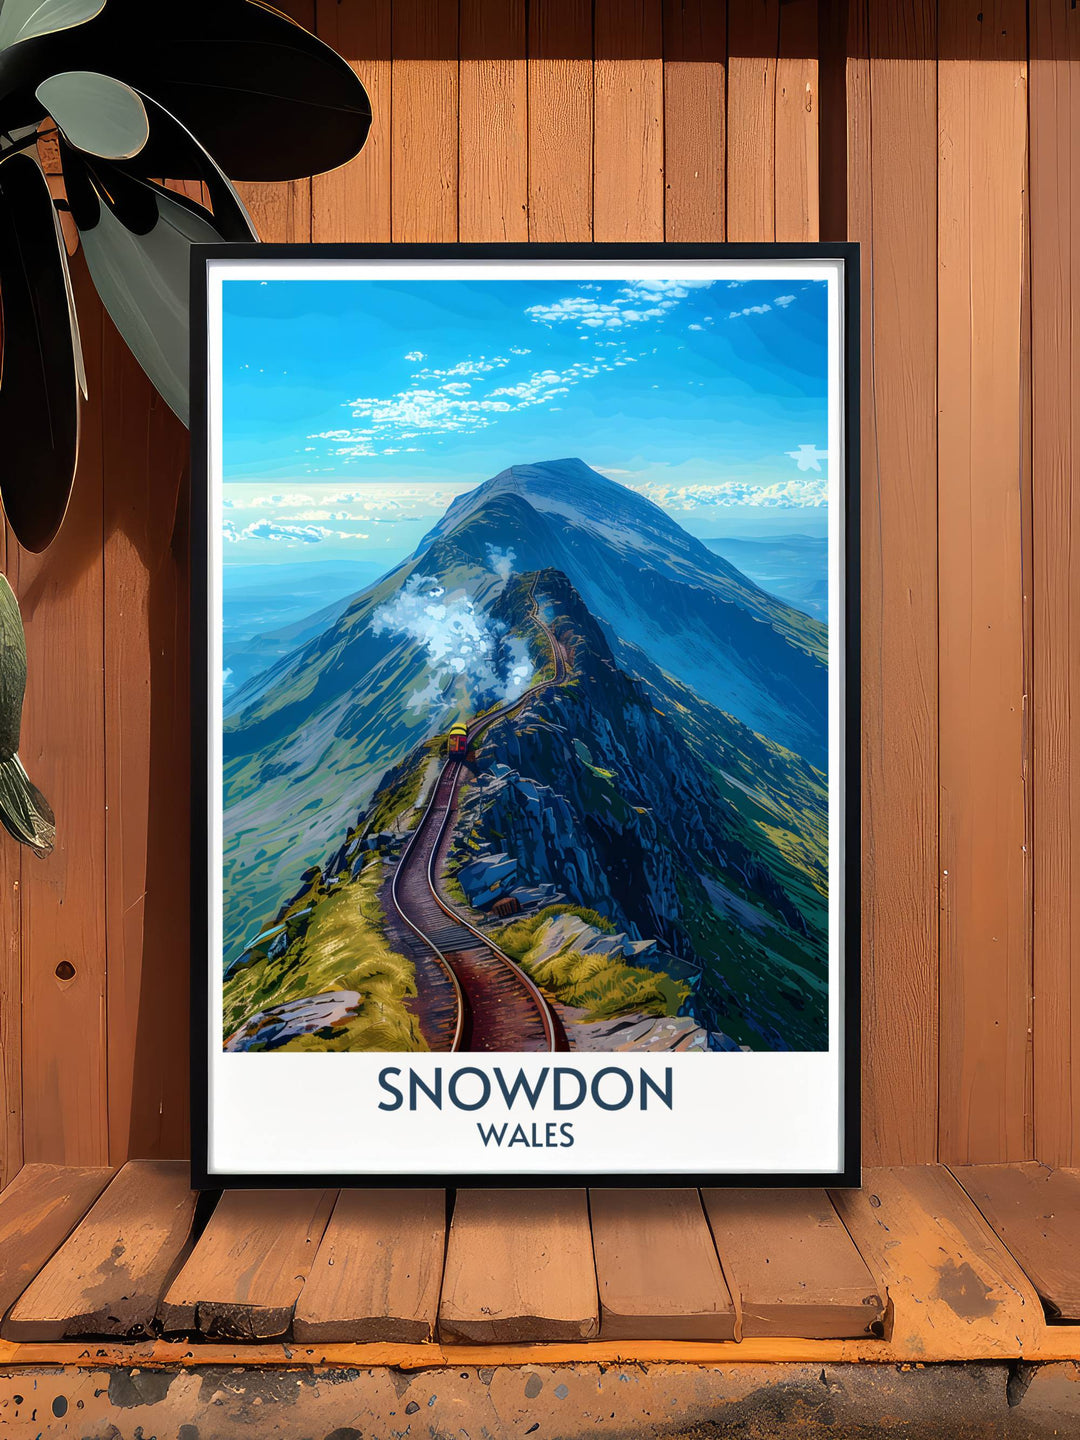 Snowdonia vintage travel poster evokes the nostalgia of classic travel advertisements. The detailed depiction of Mount Snowdon and its surroundings adds a touch of retro charm to your decor, celebrating Wales natural beauty.